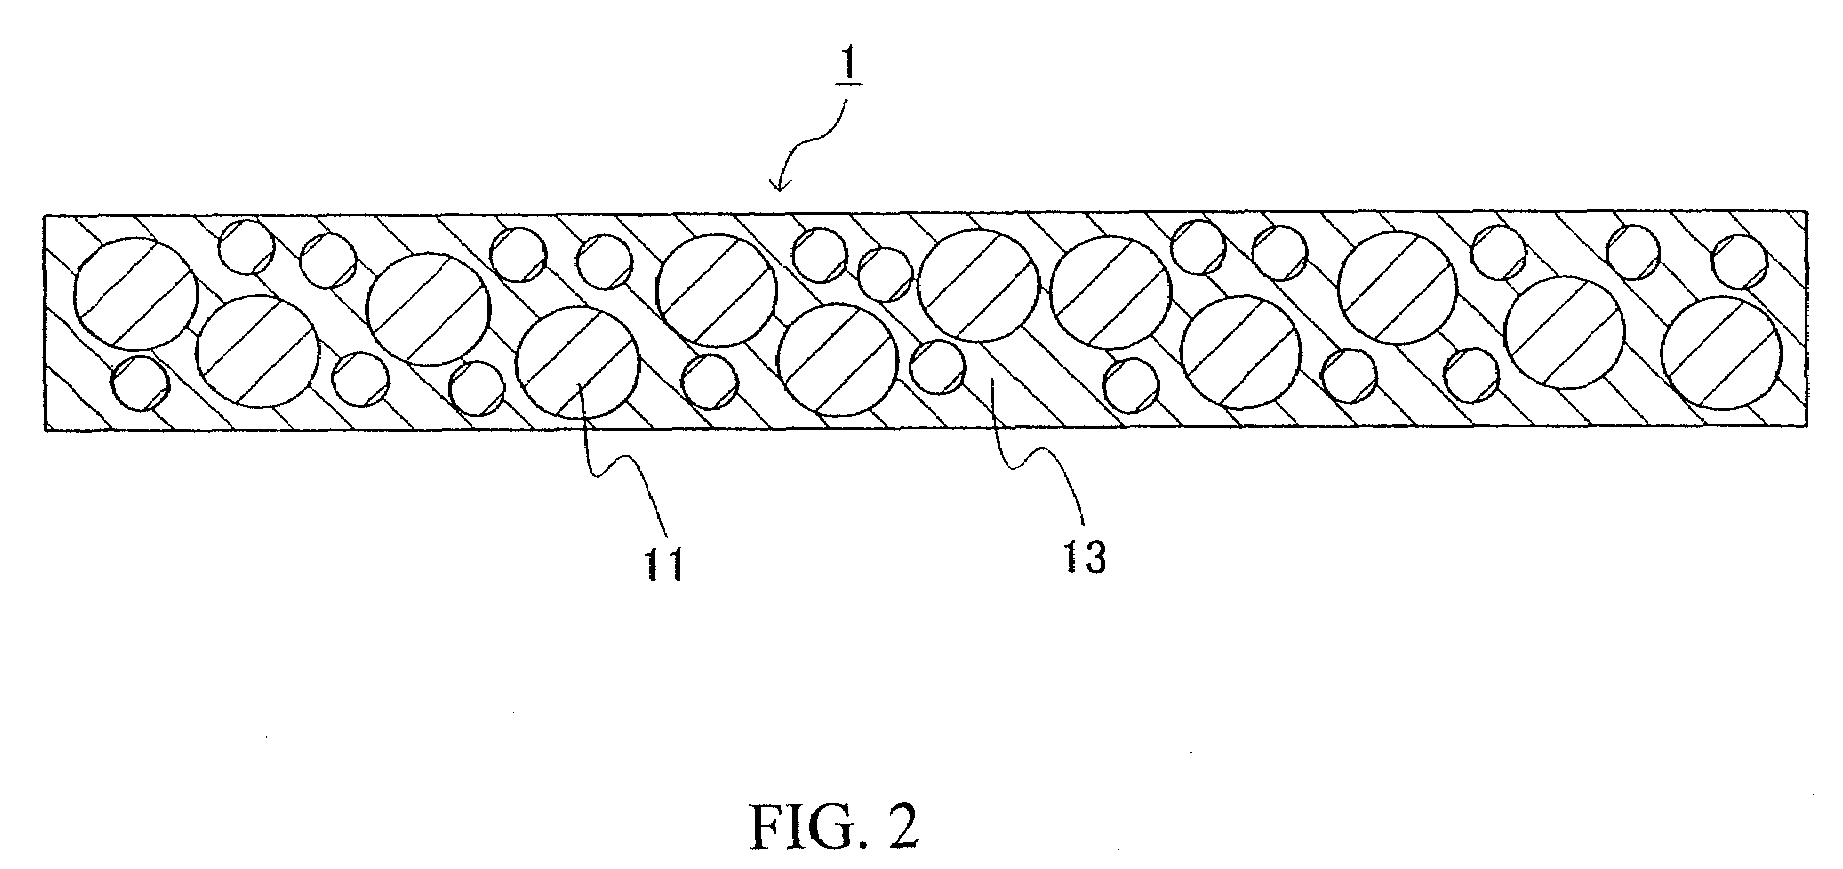 Hydrogen-permeable membrane and process for production thereof